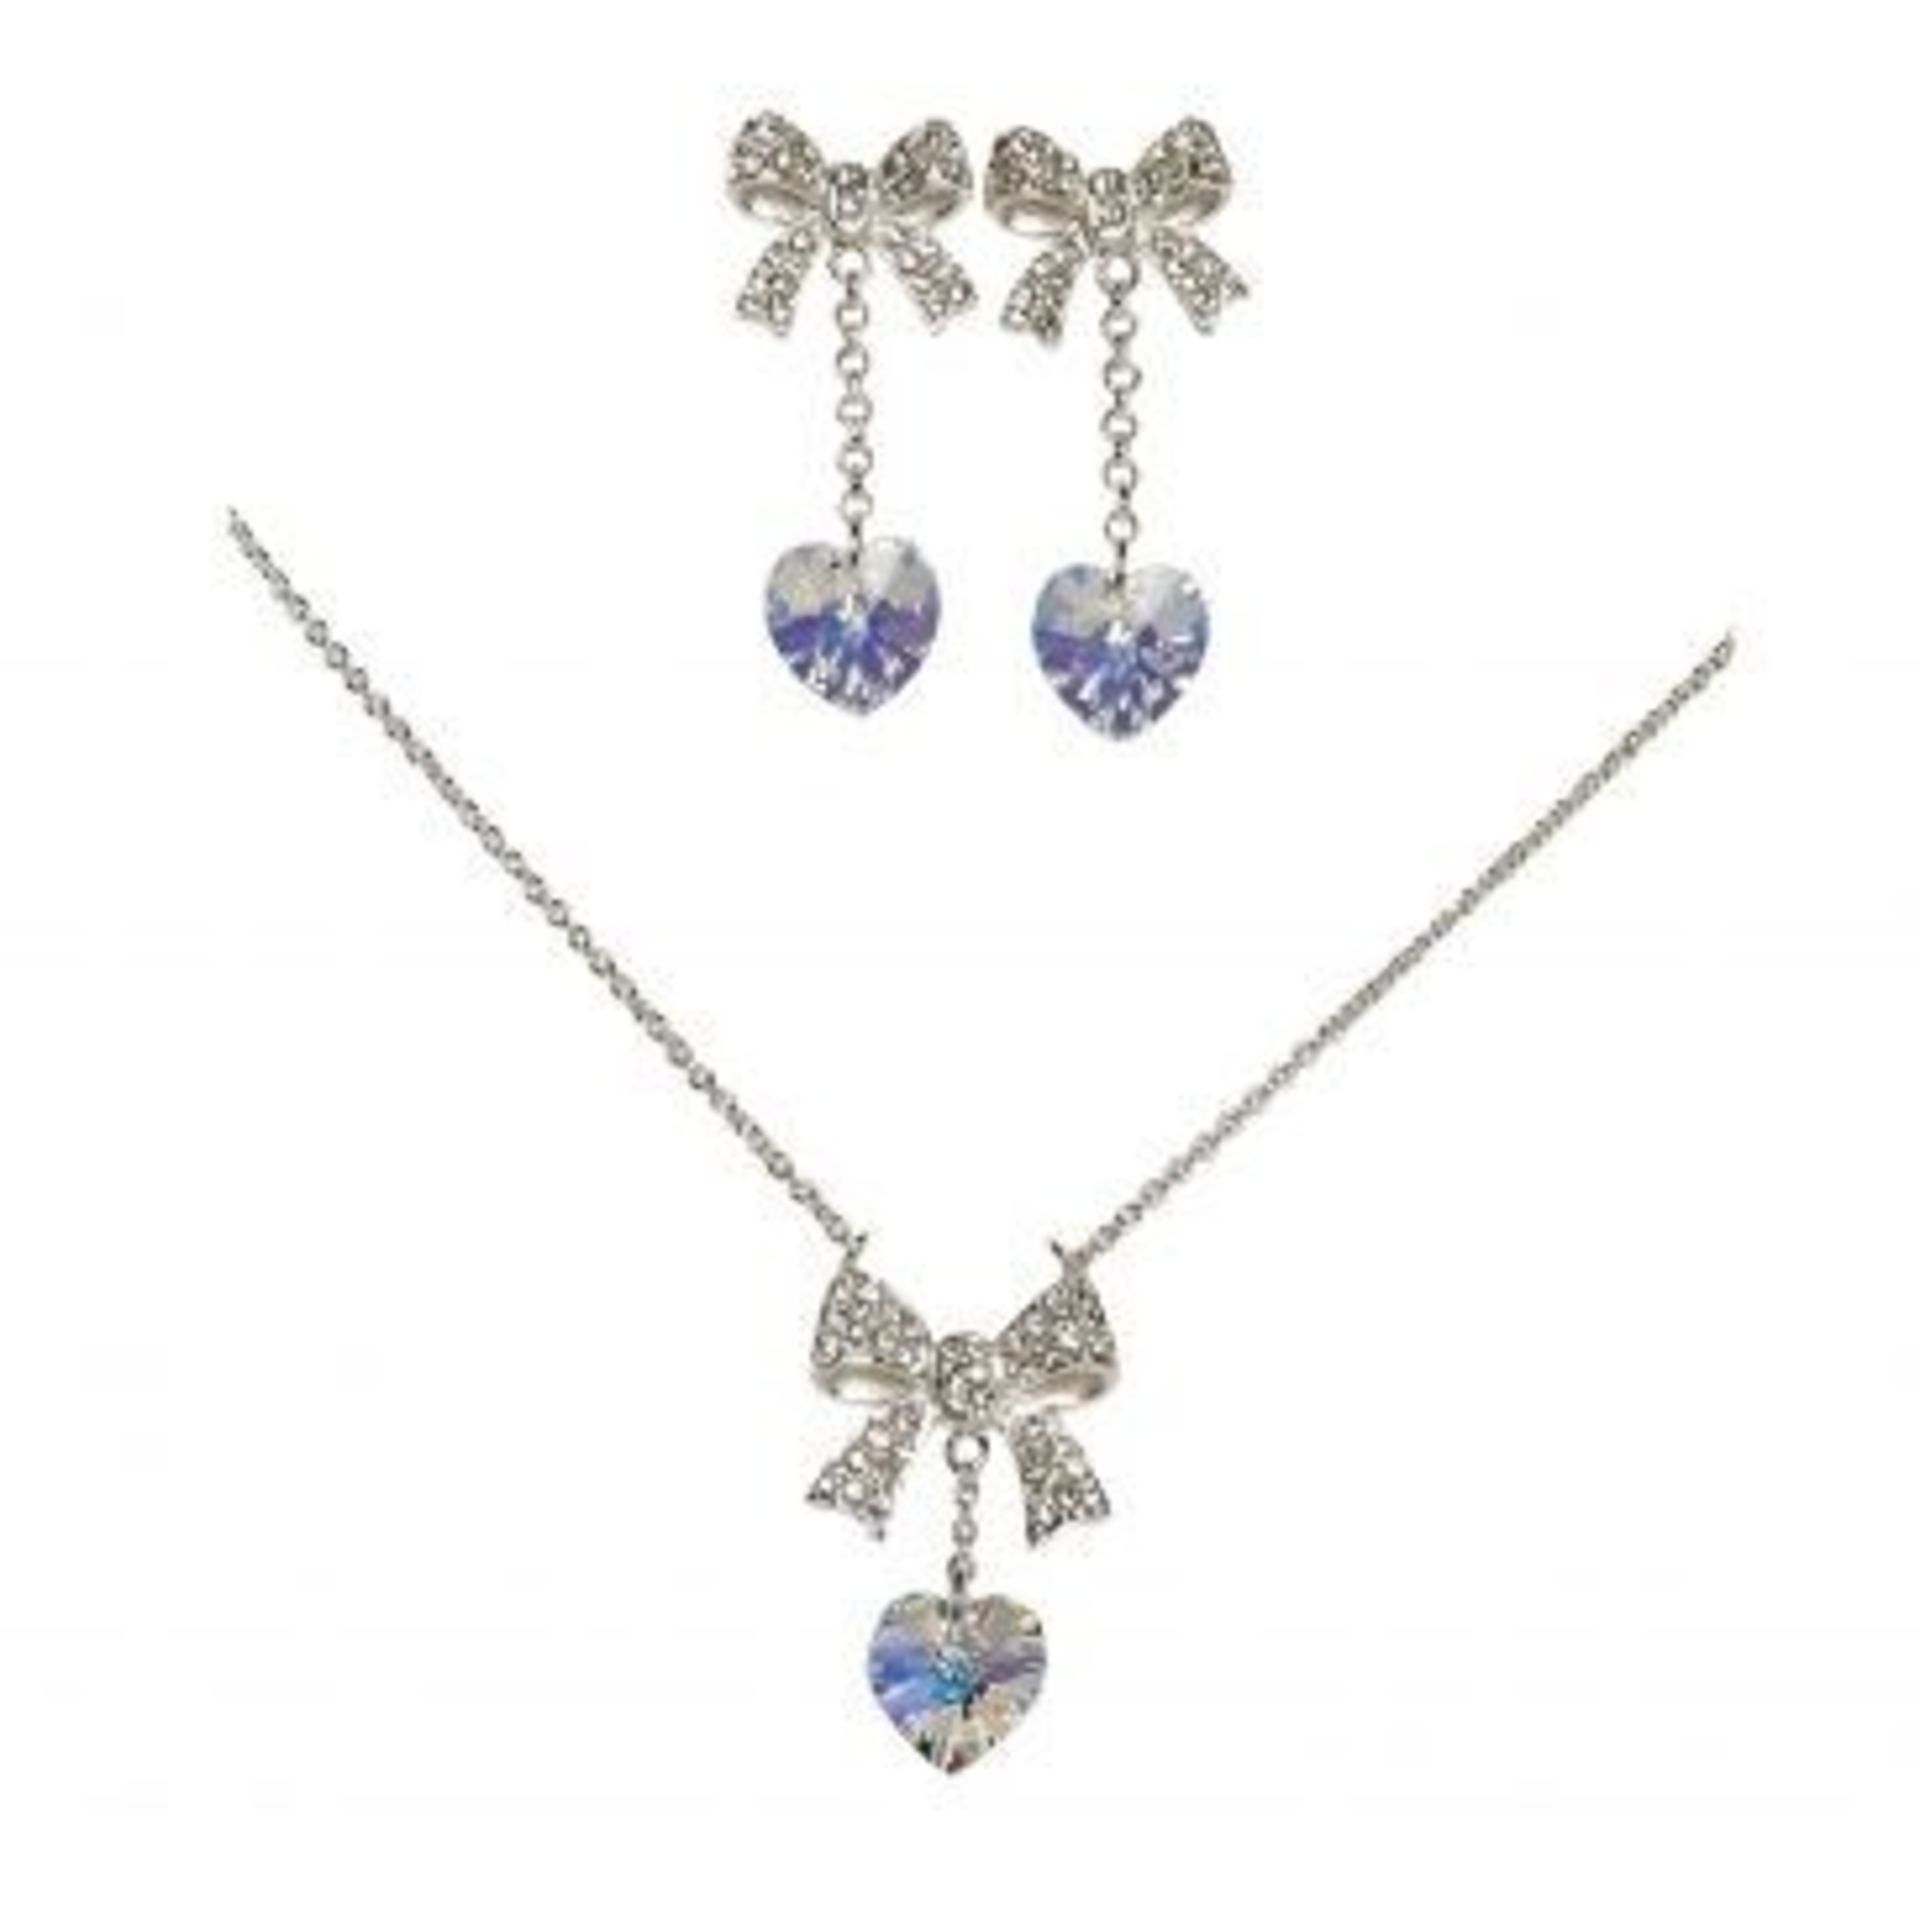 10 x HEART PENDANT AND EARRING SETS By ICE London - EGJ-9900 - Silver-tone Curb Chain Adorned With - Bild 2 aus 3